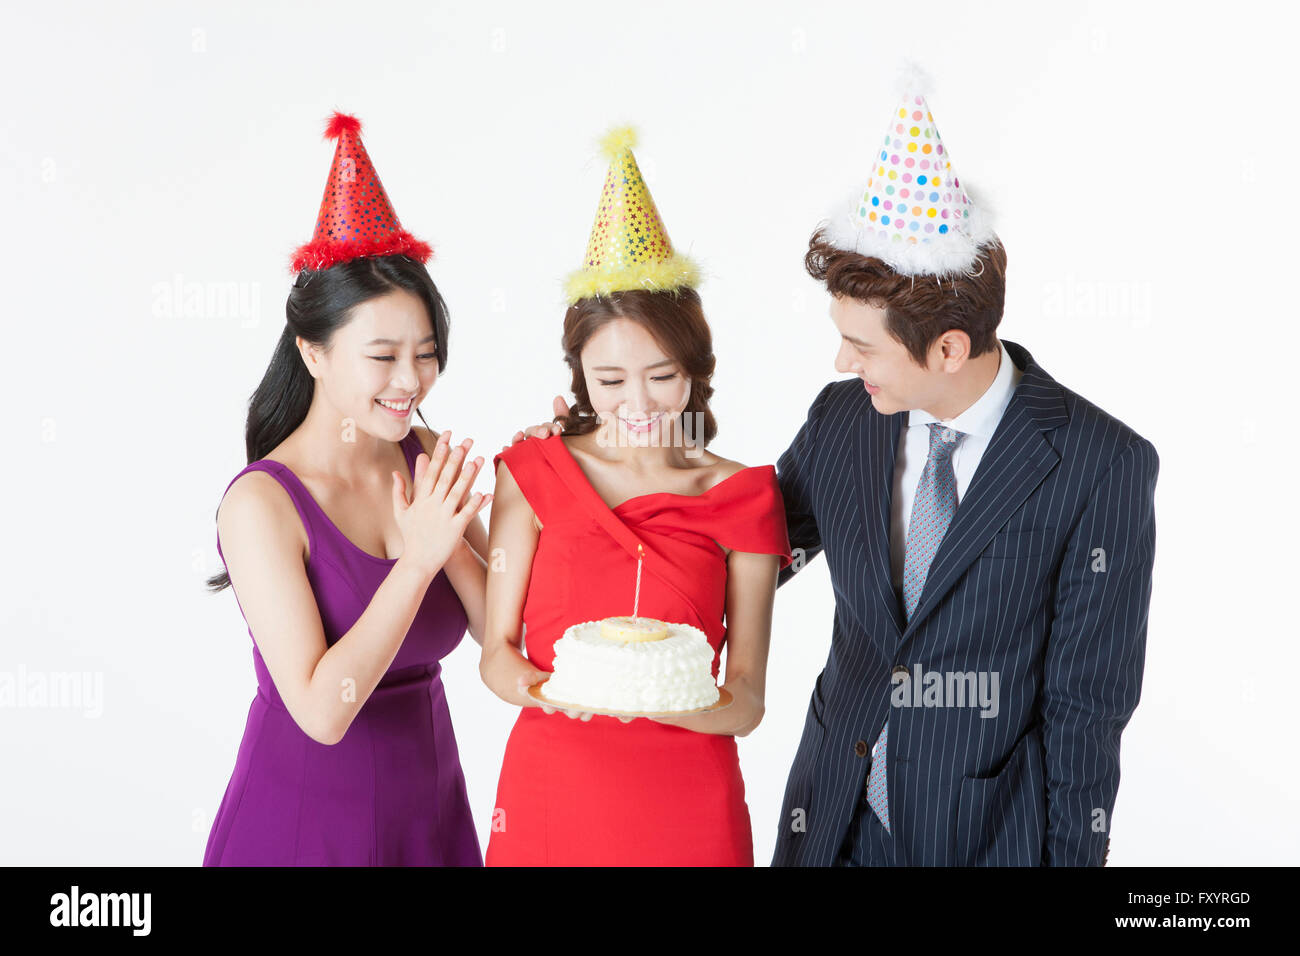 Portrait of three young people with a cake looking down Stock Photo